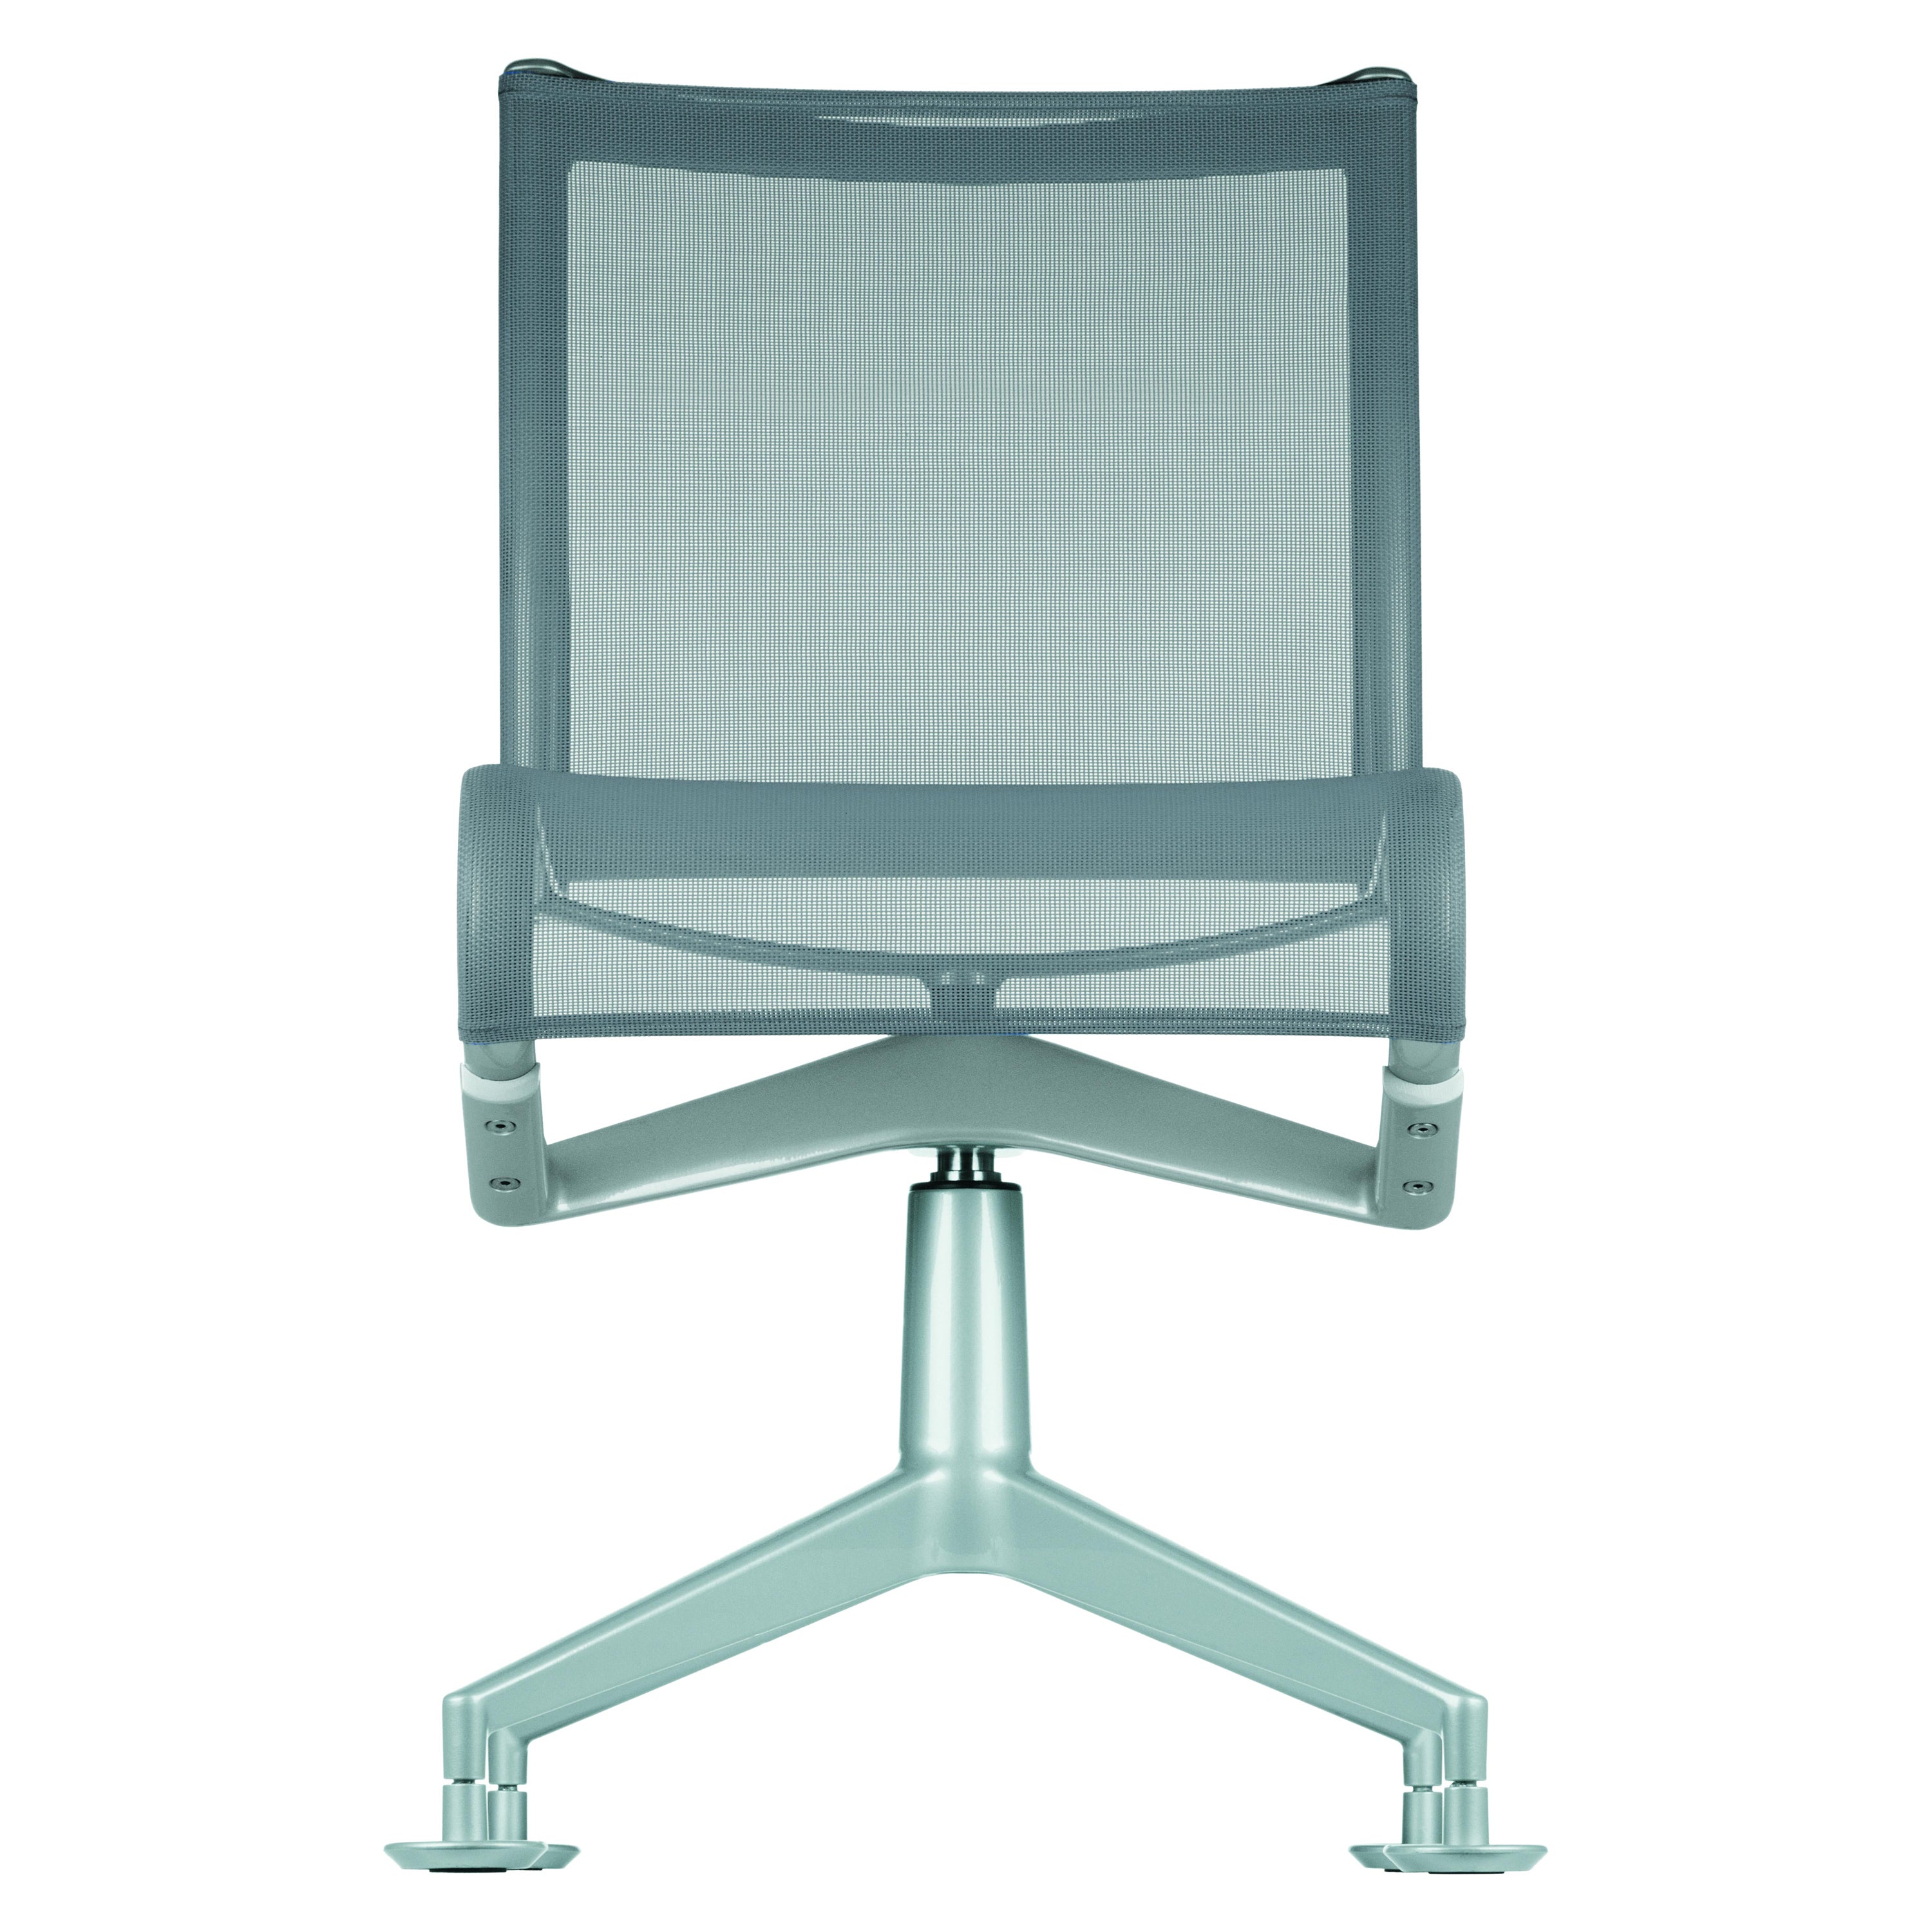 Alias 446 Meetingframe+ Tilt 47 Chair in Grey Mesh with Lacquered Aluminum Frame